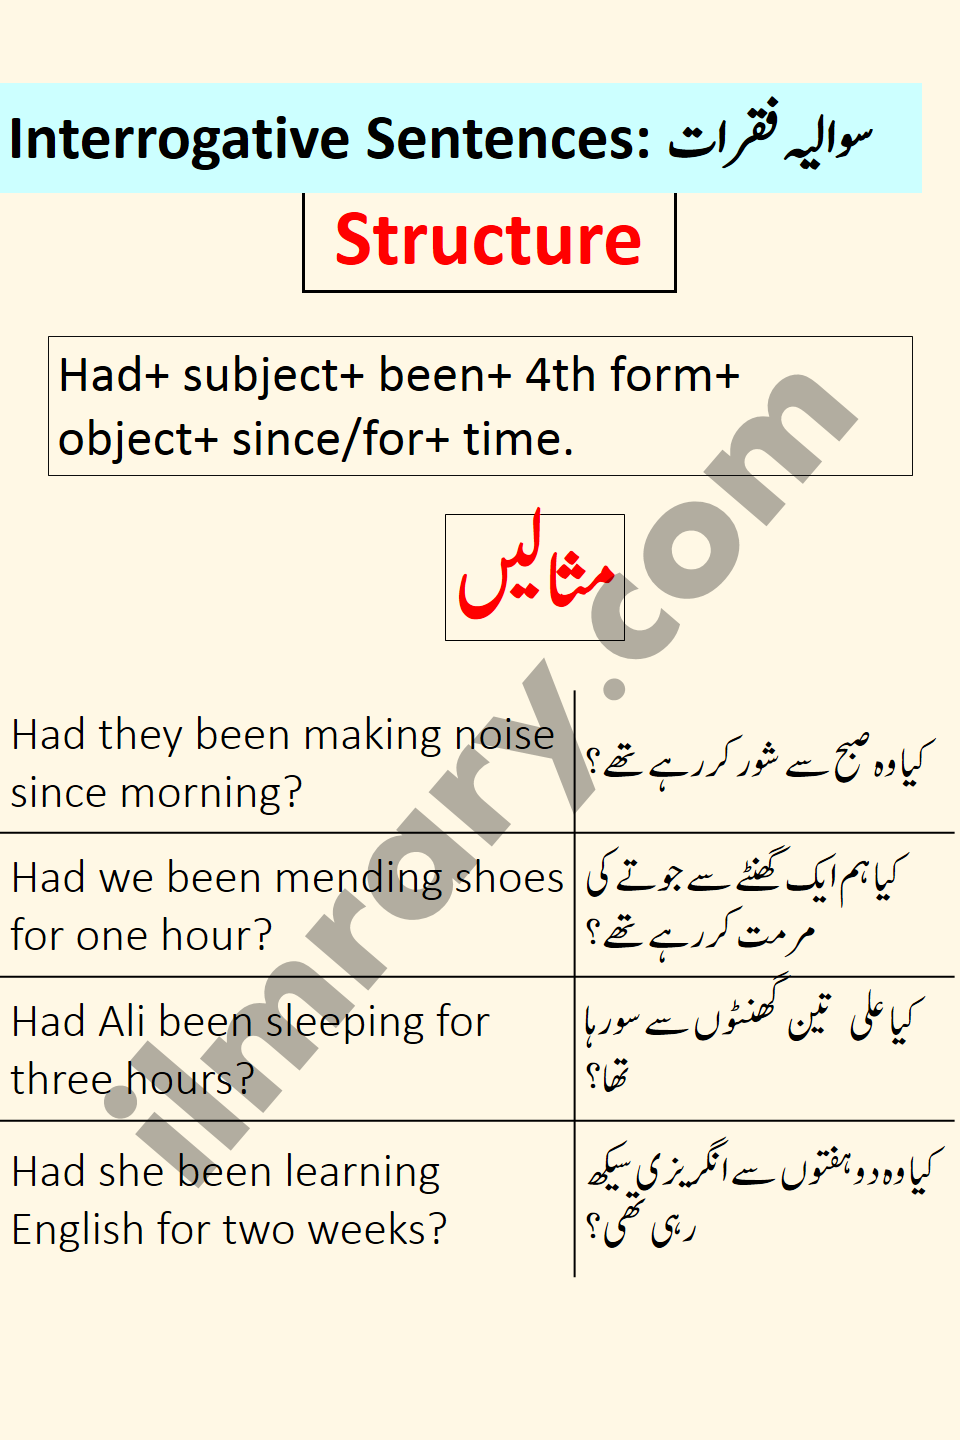 interrogative Examples for Past Perfect Continuous Tense in Urdu